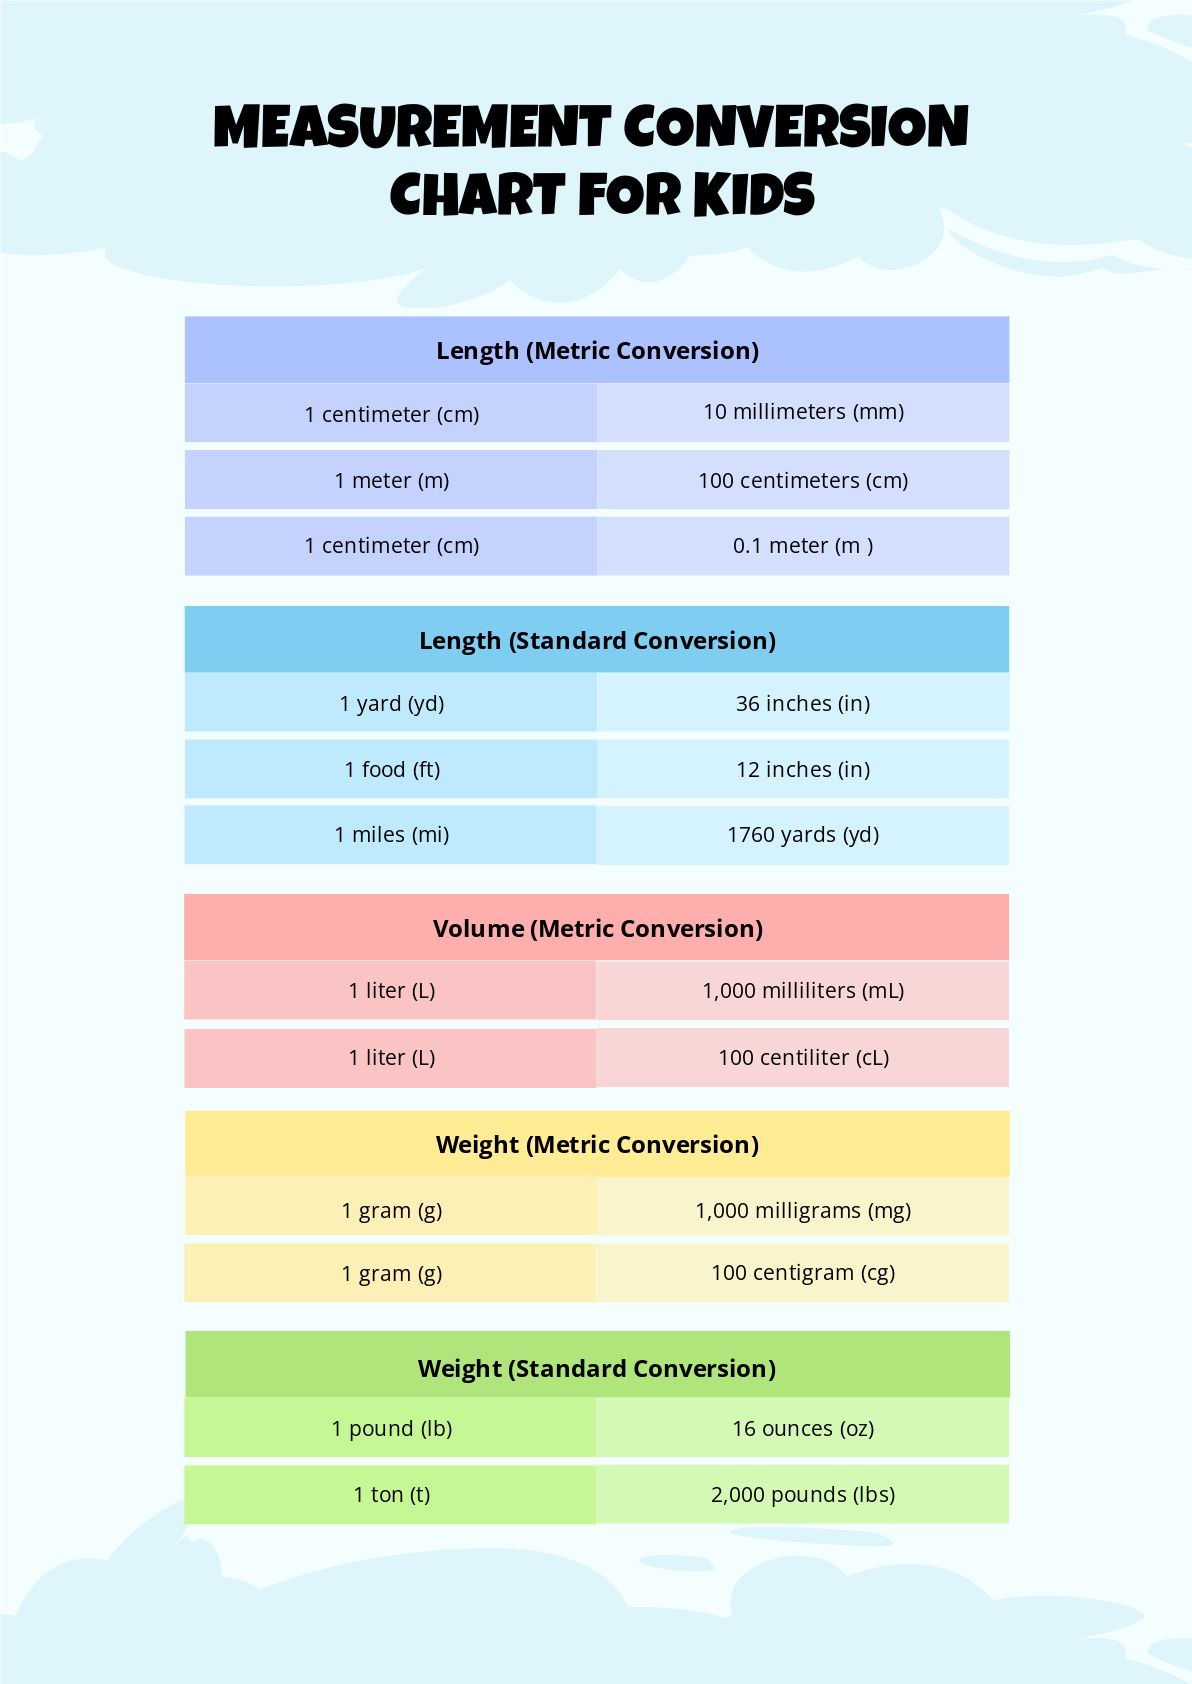 Measurement Conversion Chart For Kids in PDF - Download | Template.net